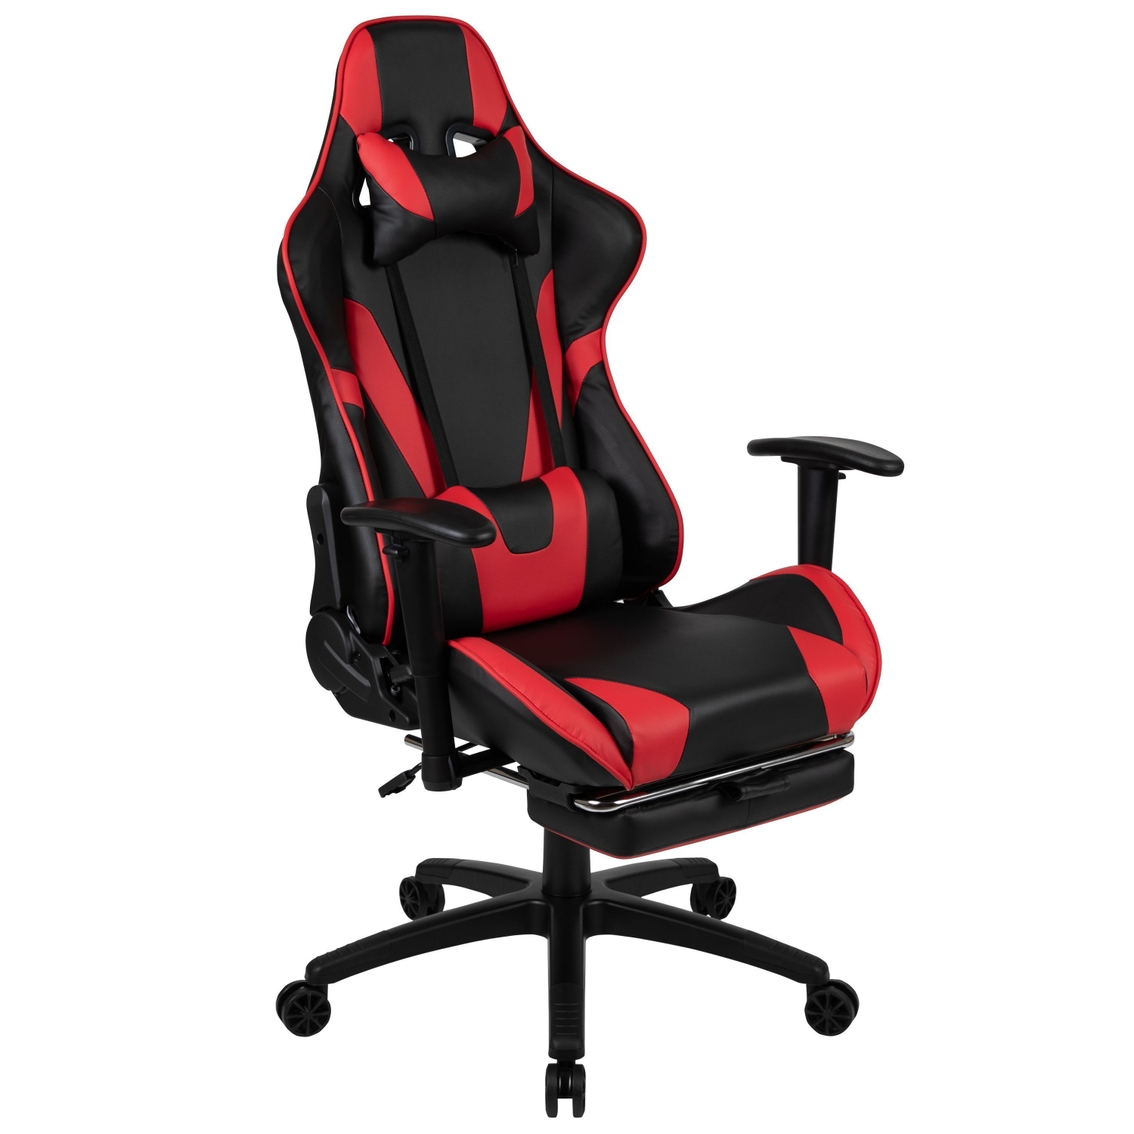 Flash Furniture Red Reclining Gaming Chair with Footrest - Image 2 of 5